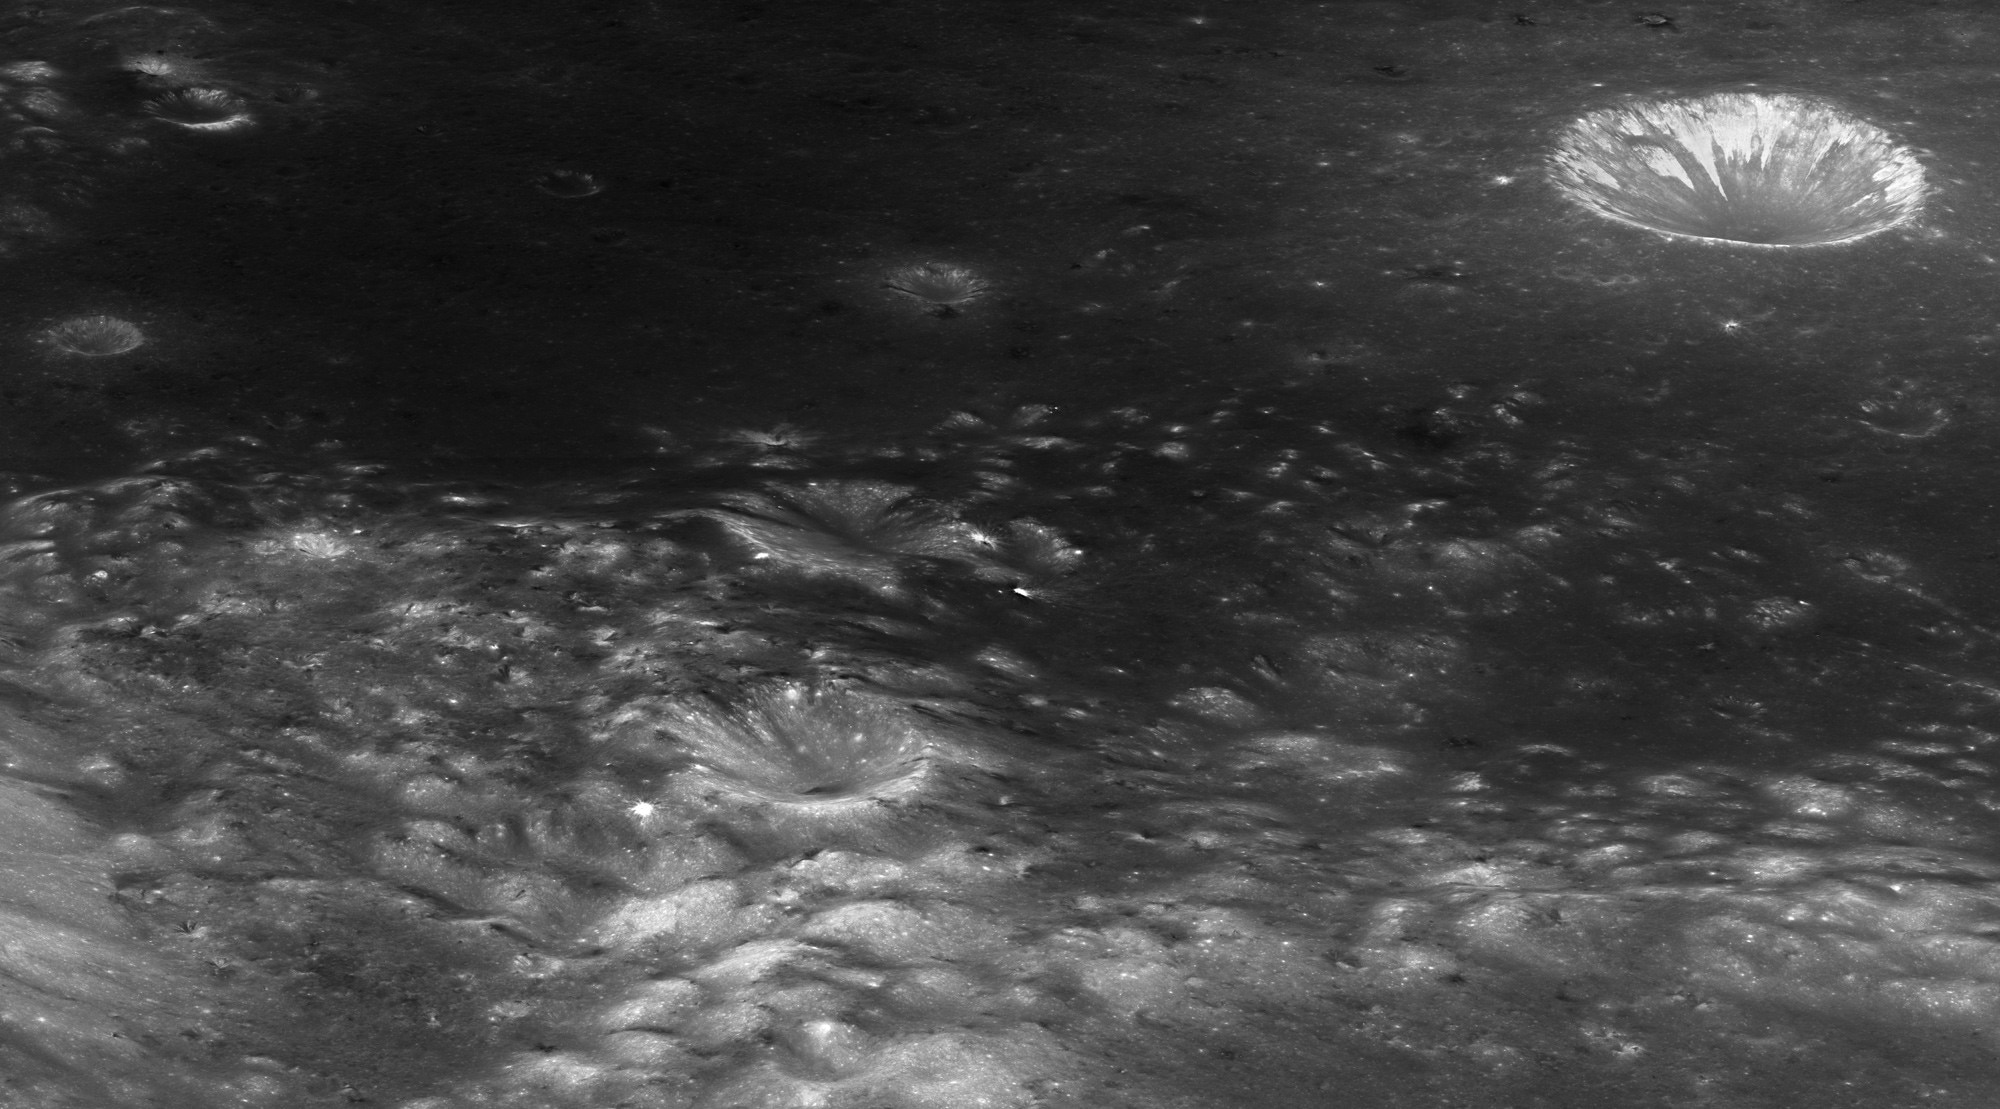 Craters around the Taurus-Littrow valley on the Moon show more erosion than other areas, possibly due to different surface compositions. Clerke crater can be seen to the upper right. Credit: NASA/GSFC/Arizona State University